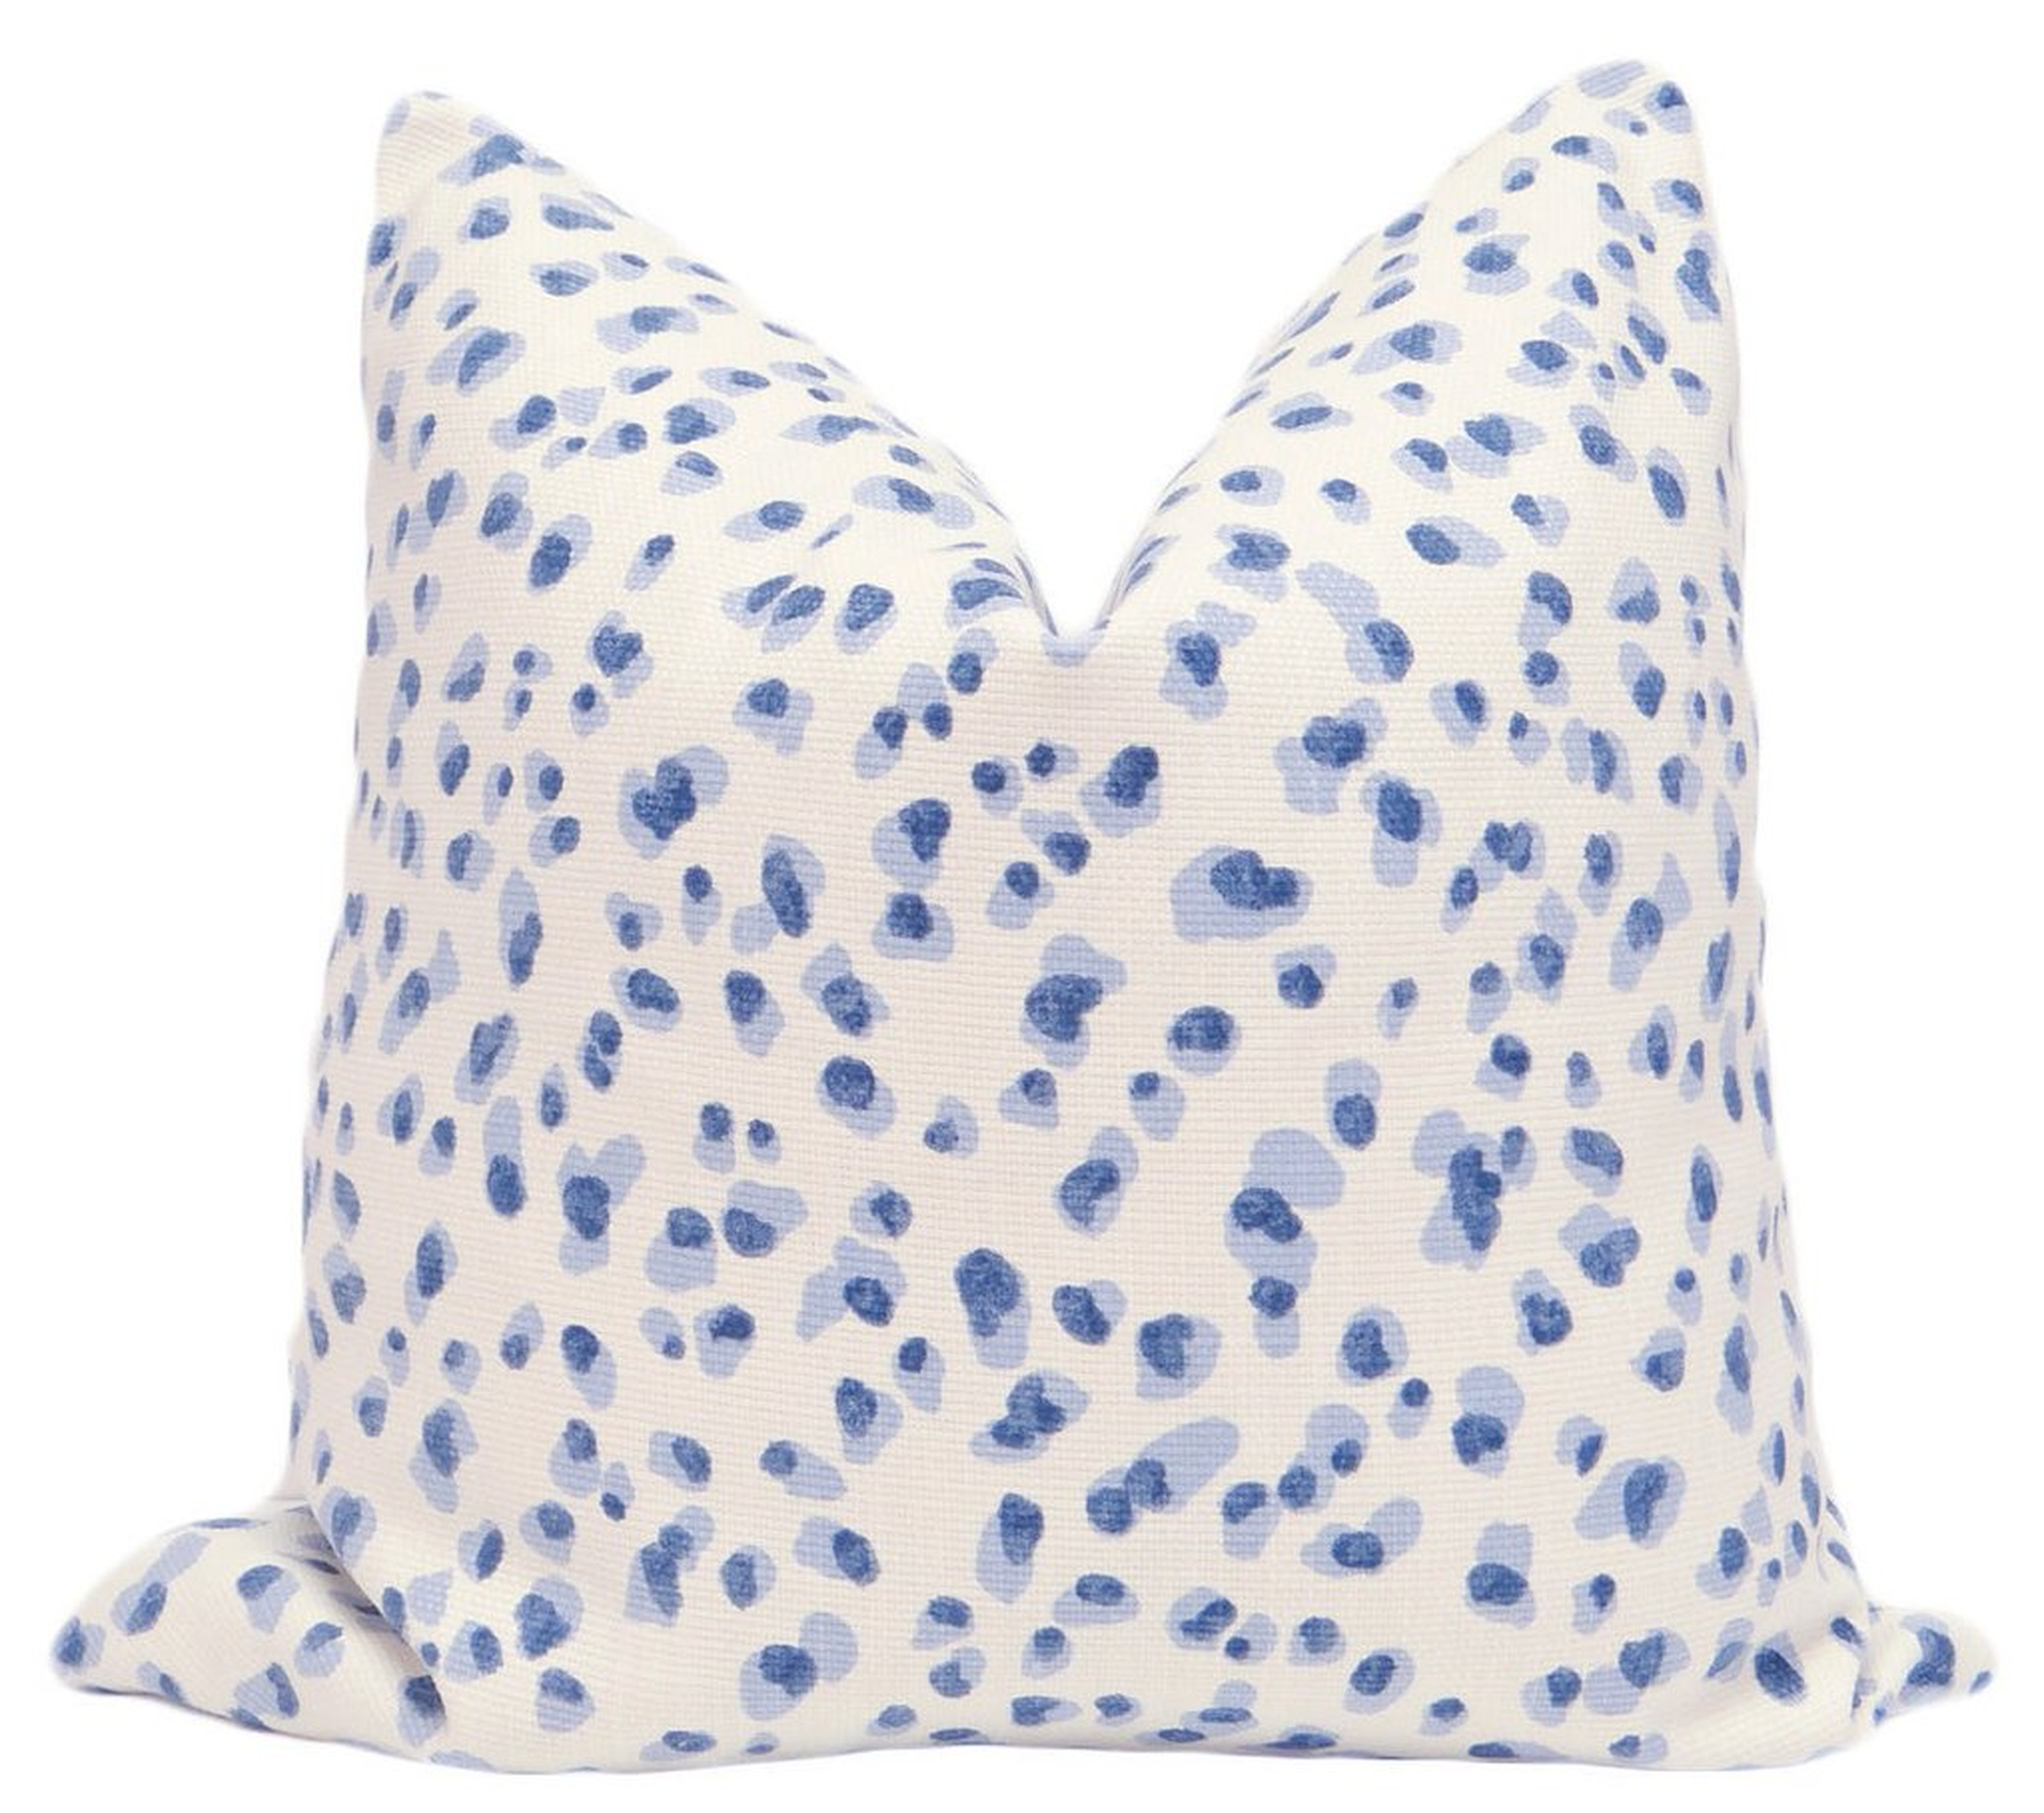 Dot Print // Periwinkle, pillow cover - Little Design Company